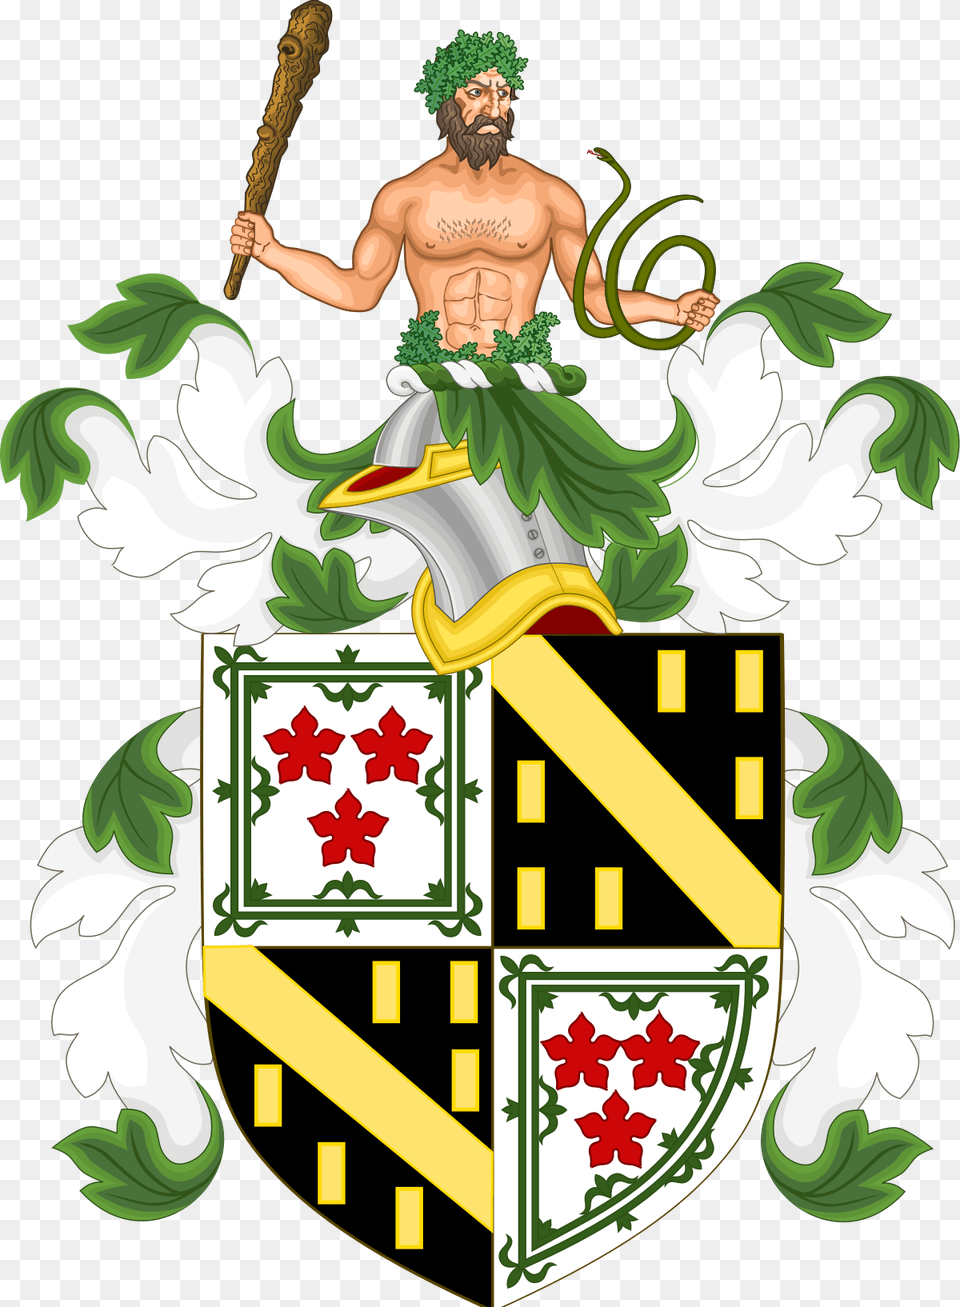 Livingston Family, Armor, Shield, Wedding, Weapon Png